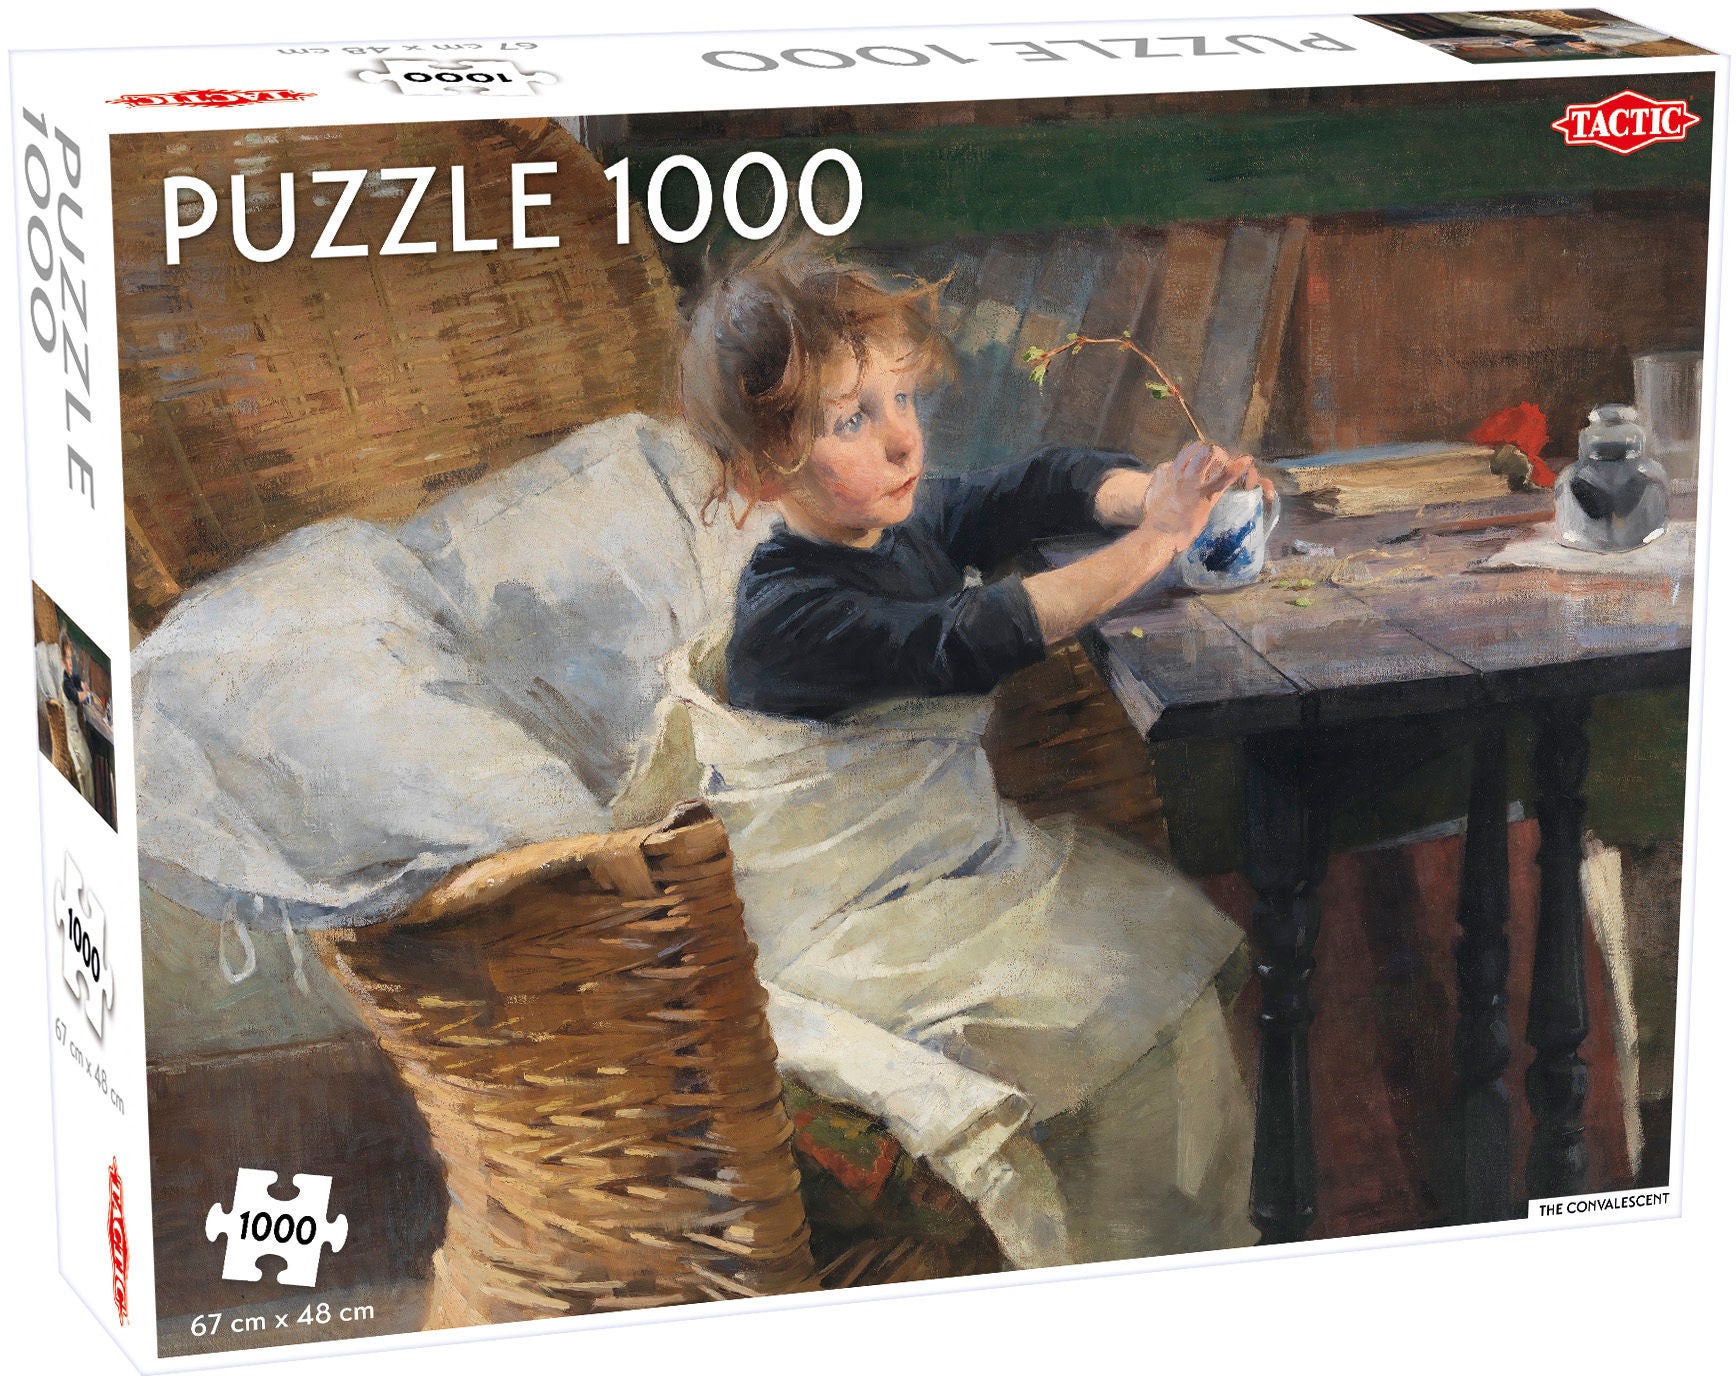 Tactic Puzzle Schjerfbeck The Convalescent 1000 Teile von Tactic